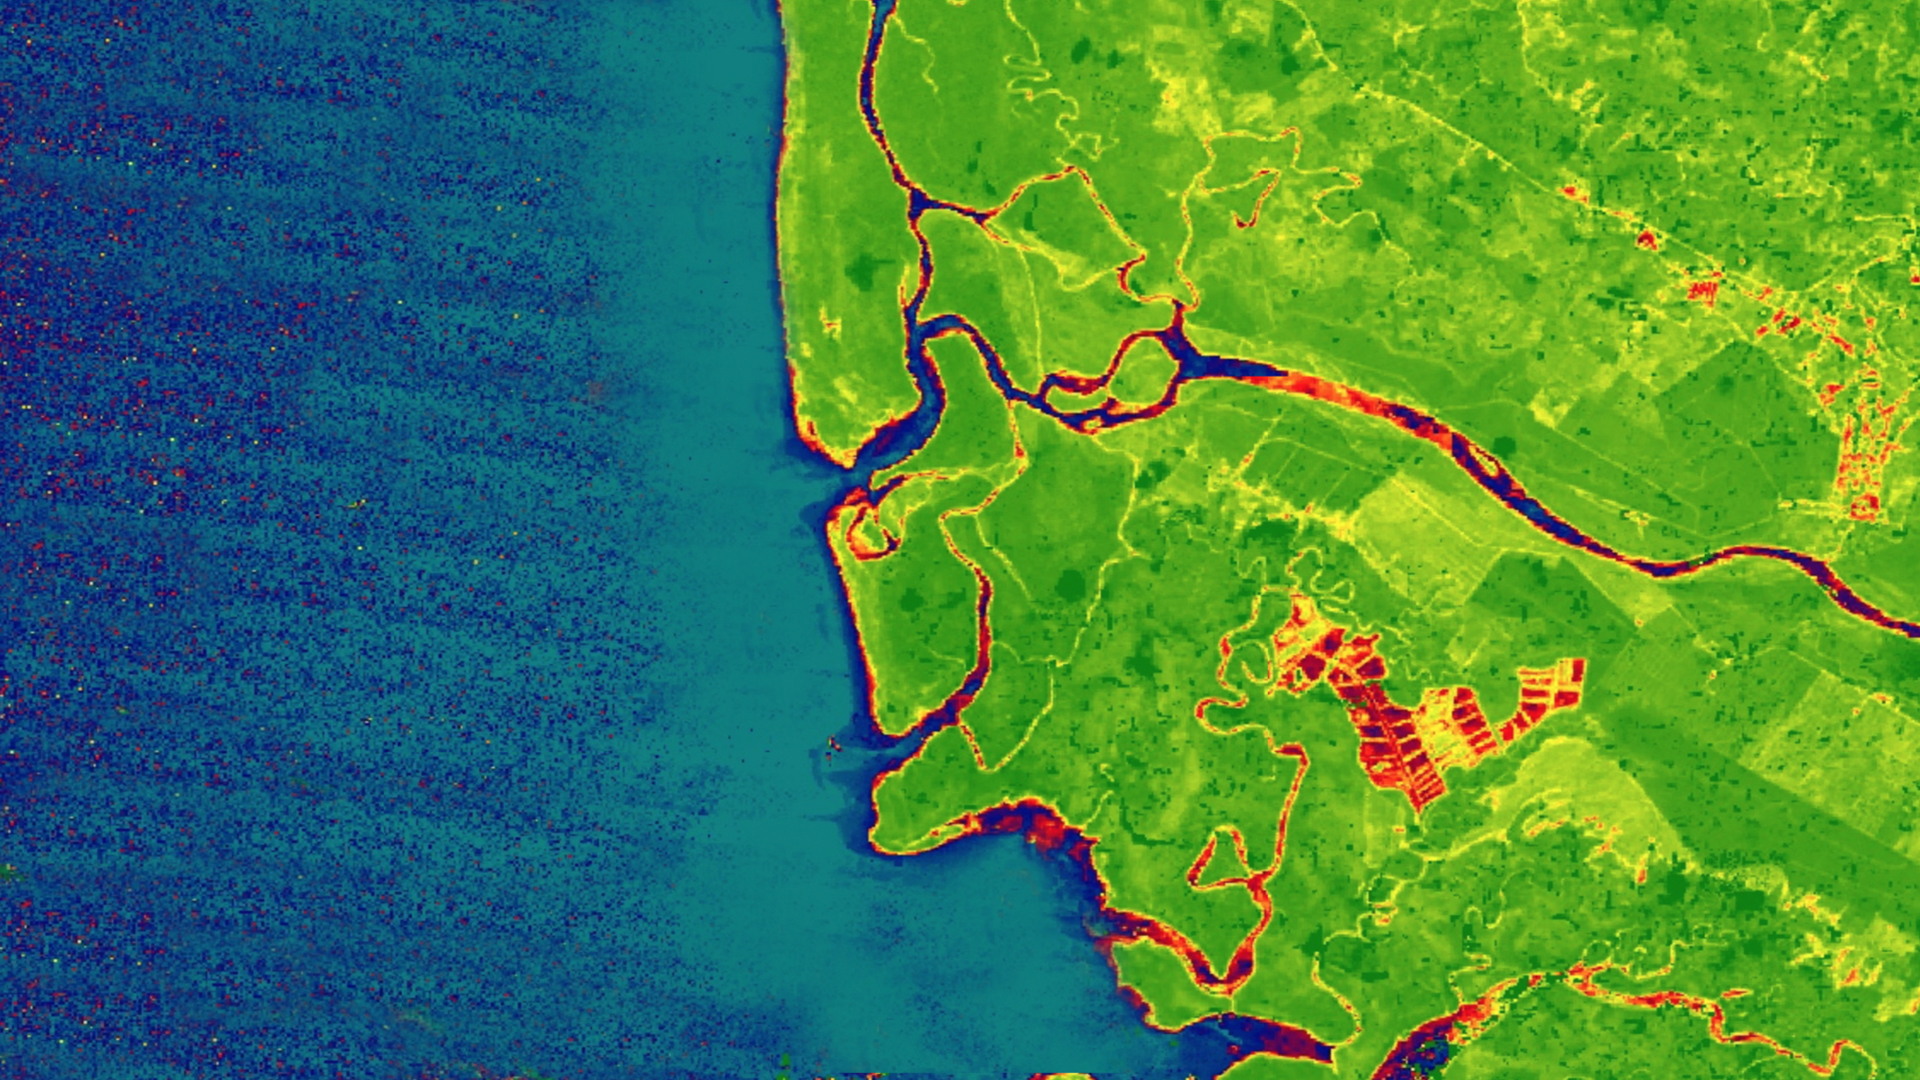 Greenest pixel composite of Normalized Difference Vegetation Index (NDVI)-processed image using 2019 data from Landsat 8 Operational Land Imager  blended with a true color band combination (3, 2, 1) of the Western coast of Costa Rica in the Osa region. The areas of highest vegetation are represented in green, areas of lowest vegetation are represented in red, and water is represented in blue. The land cover characteristics shown in an NDVI image improve land cover classification accuracy.  Keywords: NDVI, Landsat, land cover